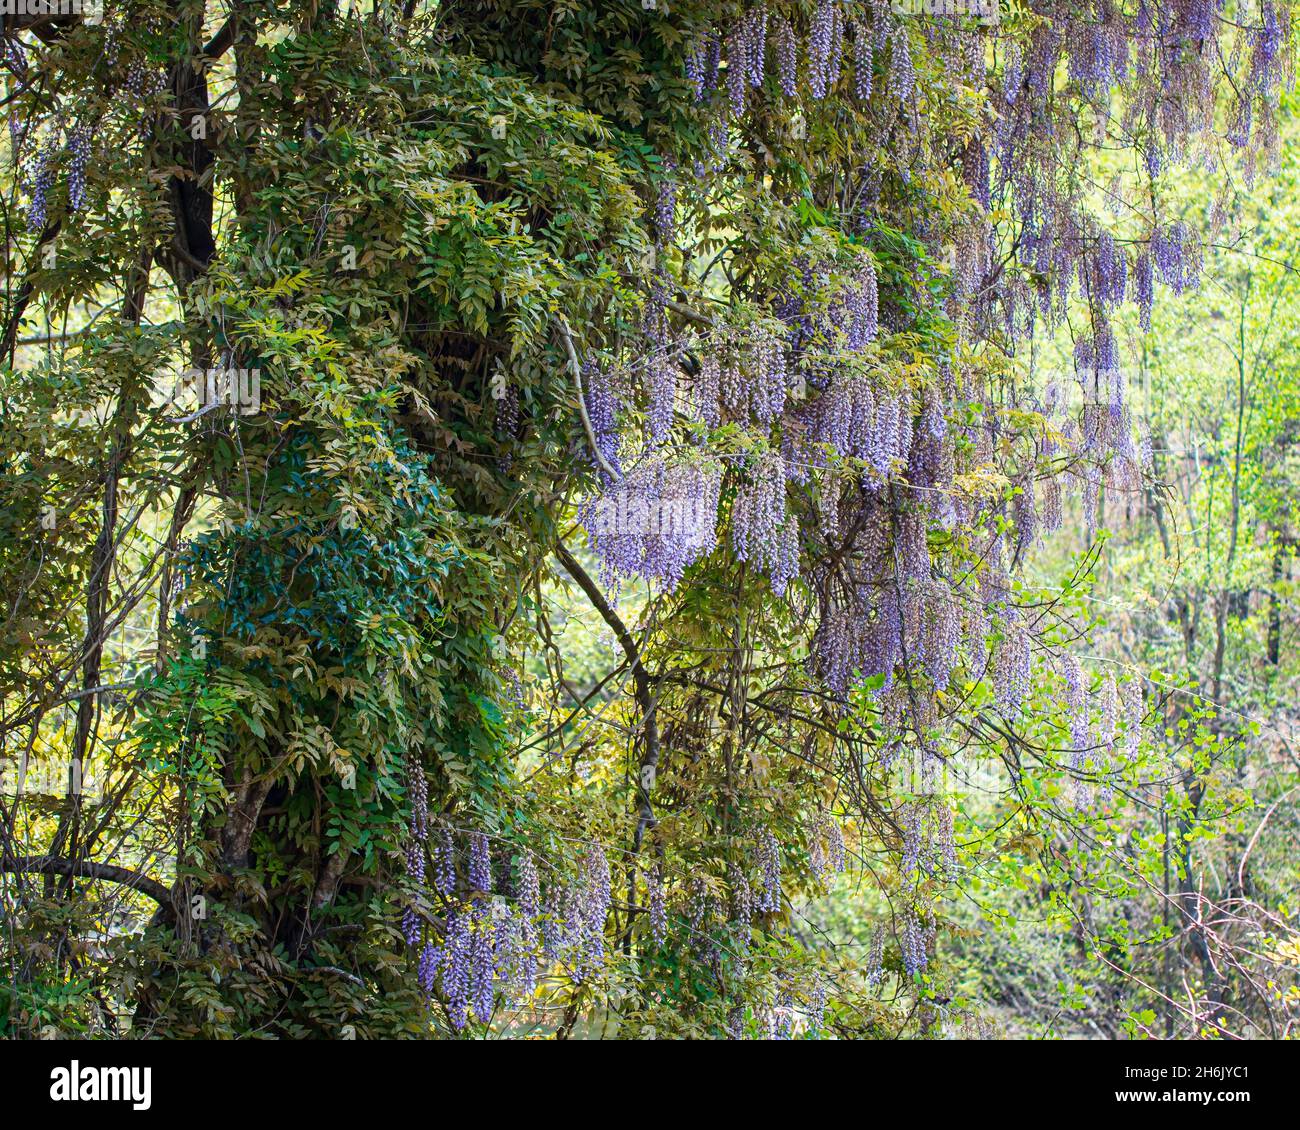 Blooming wisteria (Wisteria frutescens) vines growing wild in southeaster Alabama in April. Stock Photo